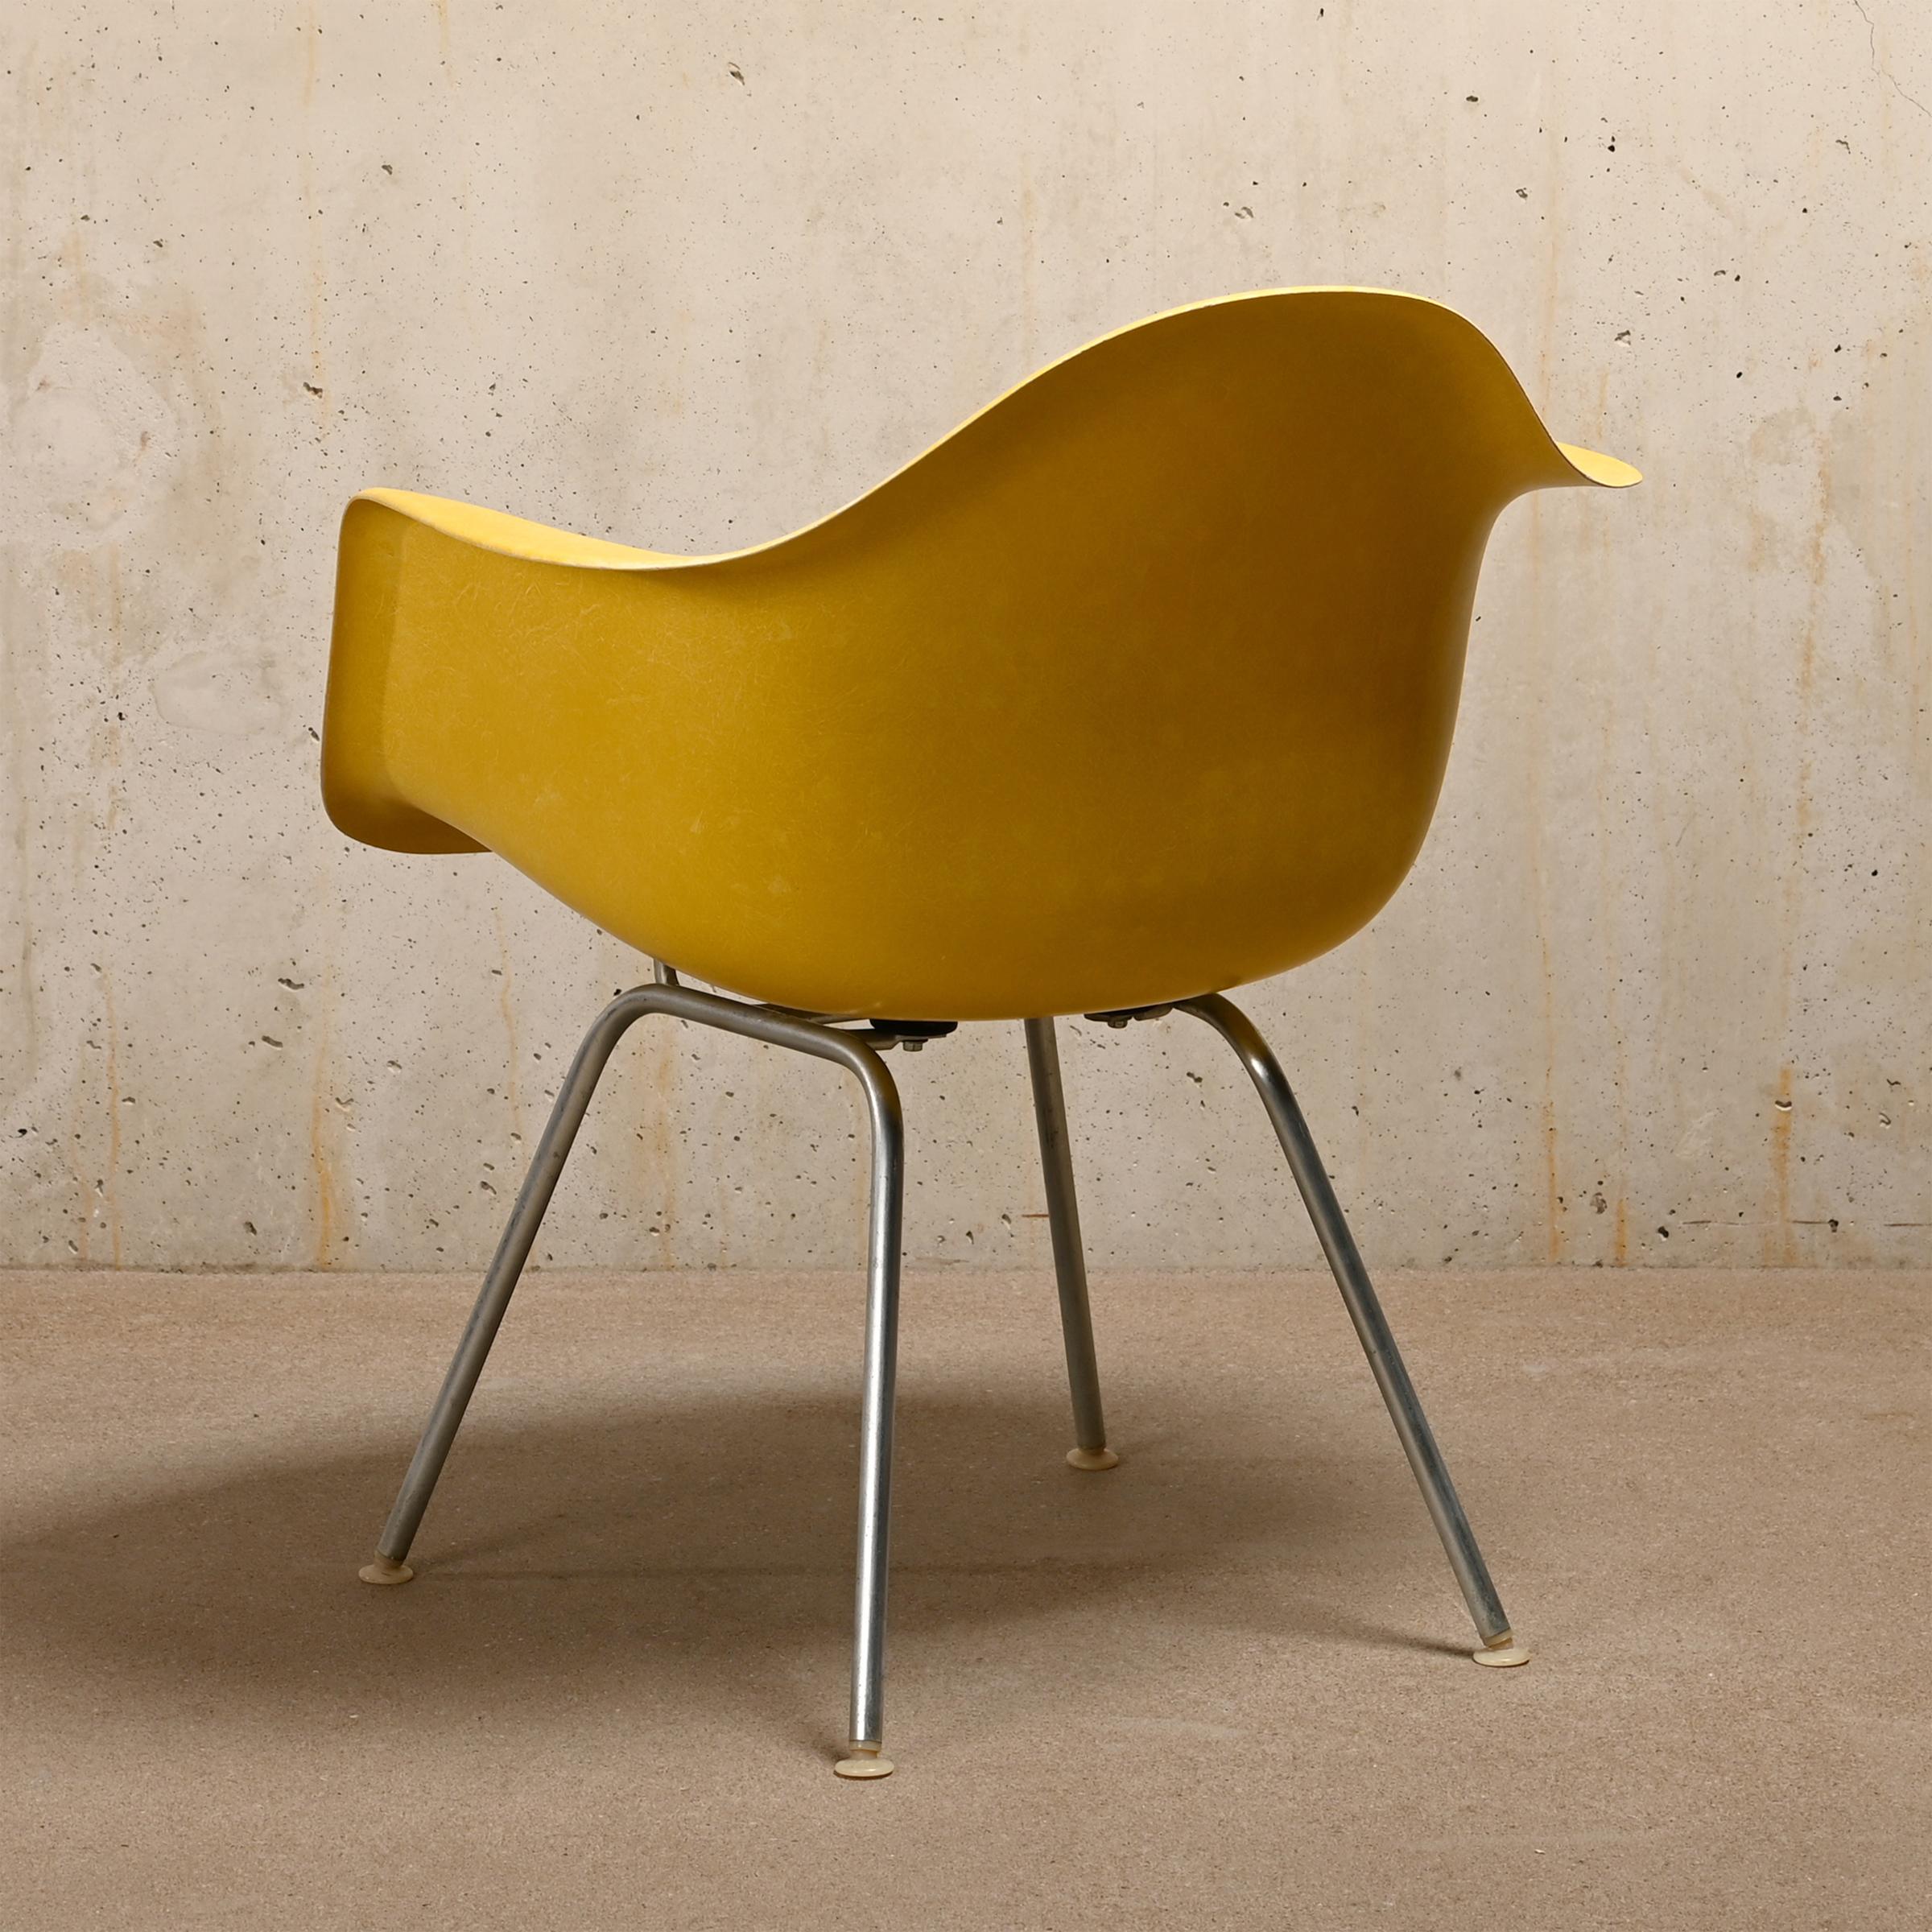 Molded Charles & Ray Eames Max Armchair in Canary Yellow Fiberglass for Herman Miller